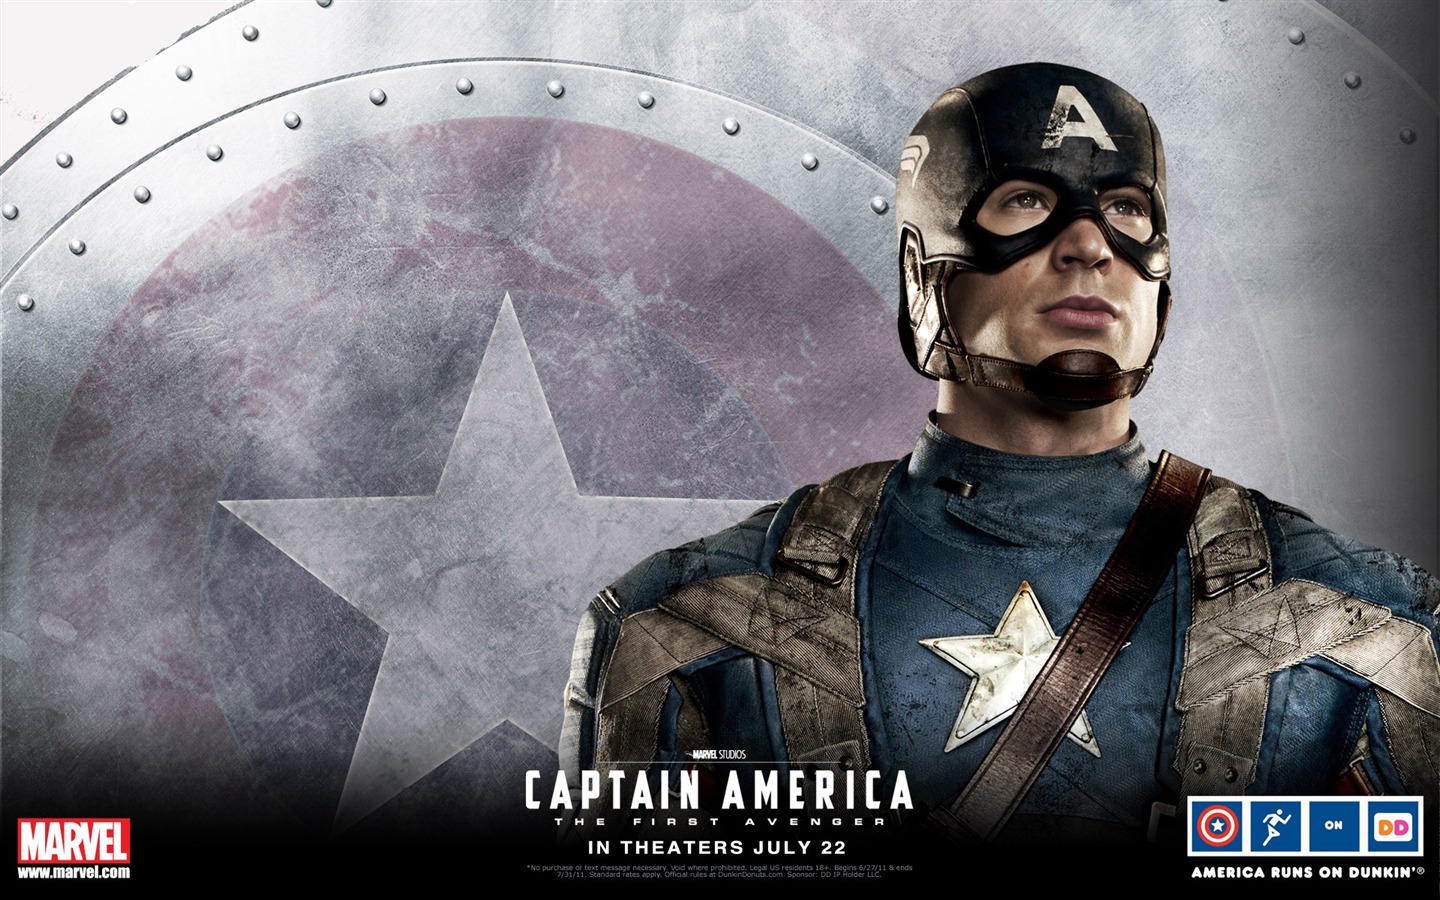 Captain America: The First Avenger wallpapers HD #5 - 1440x900